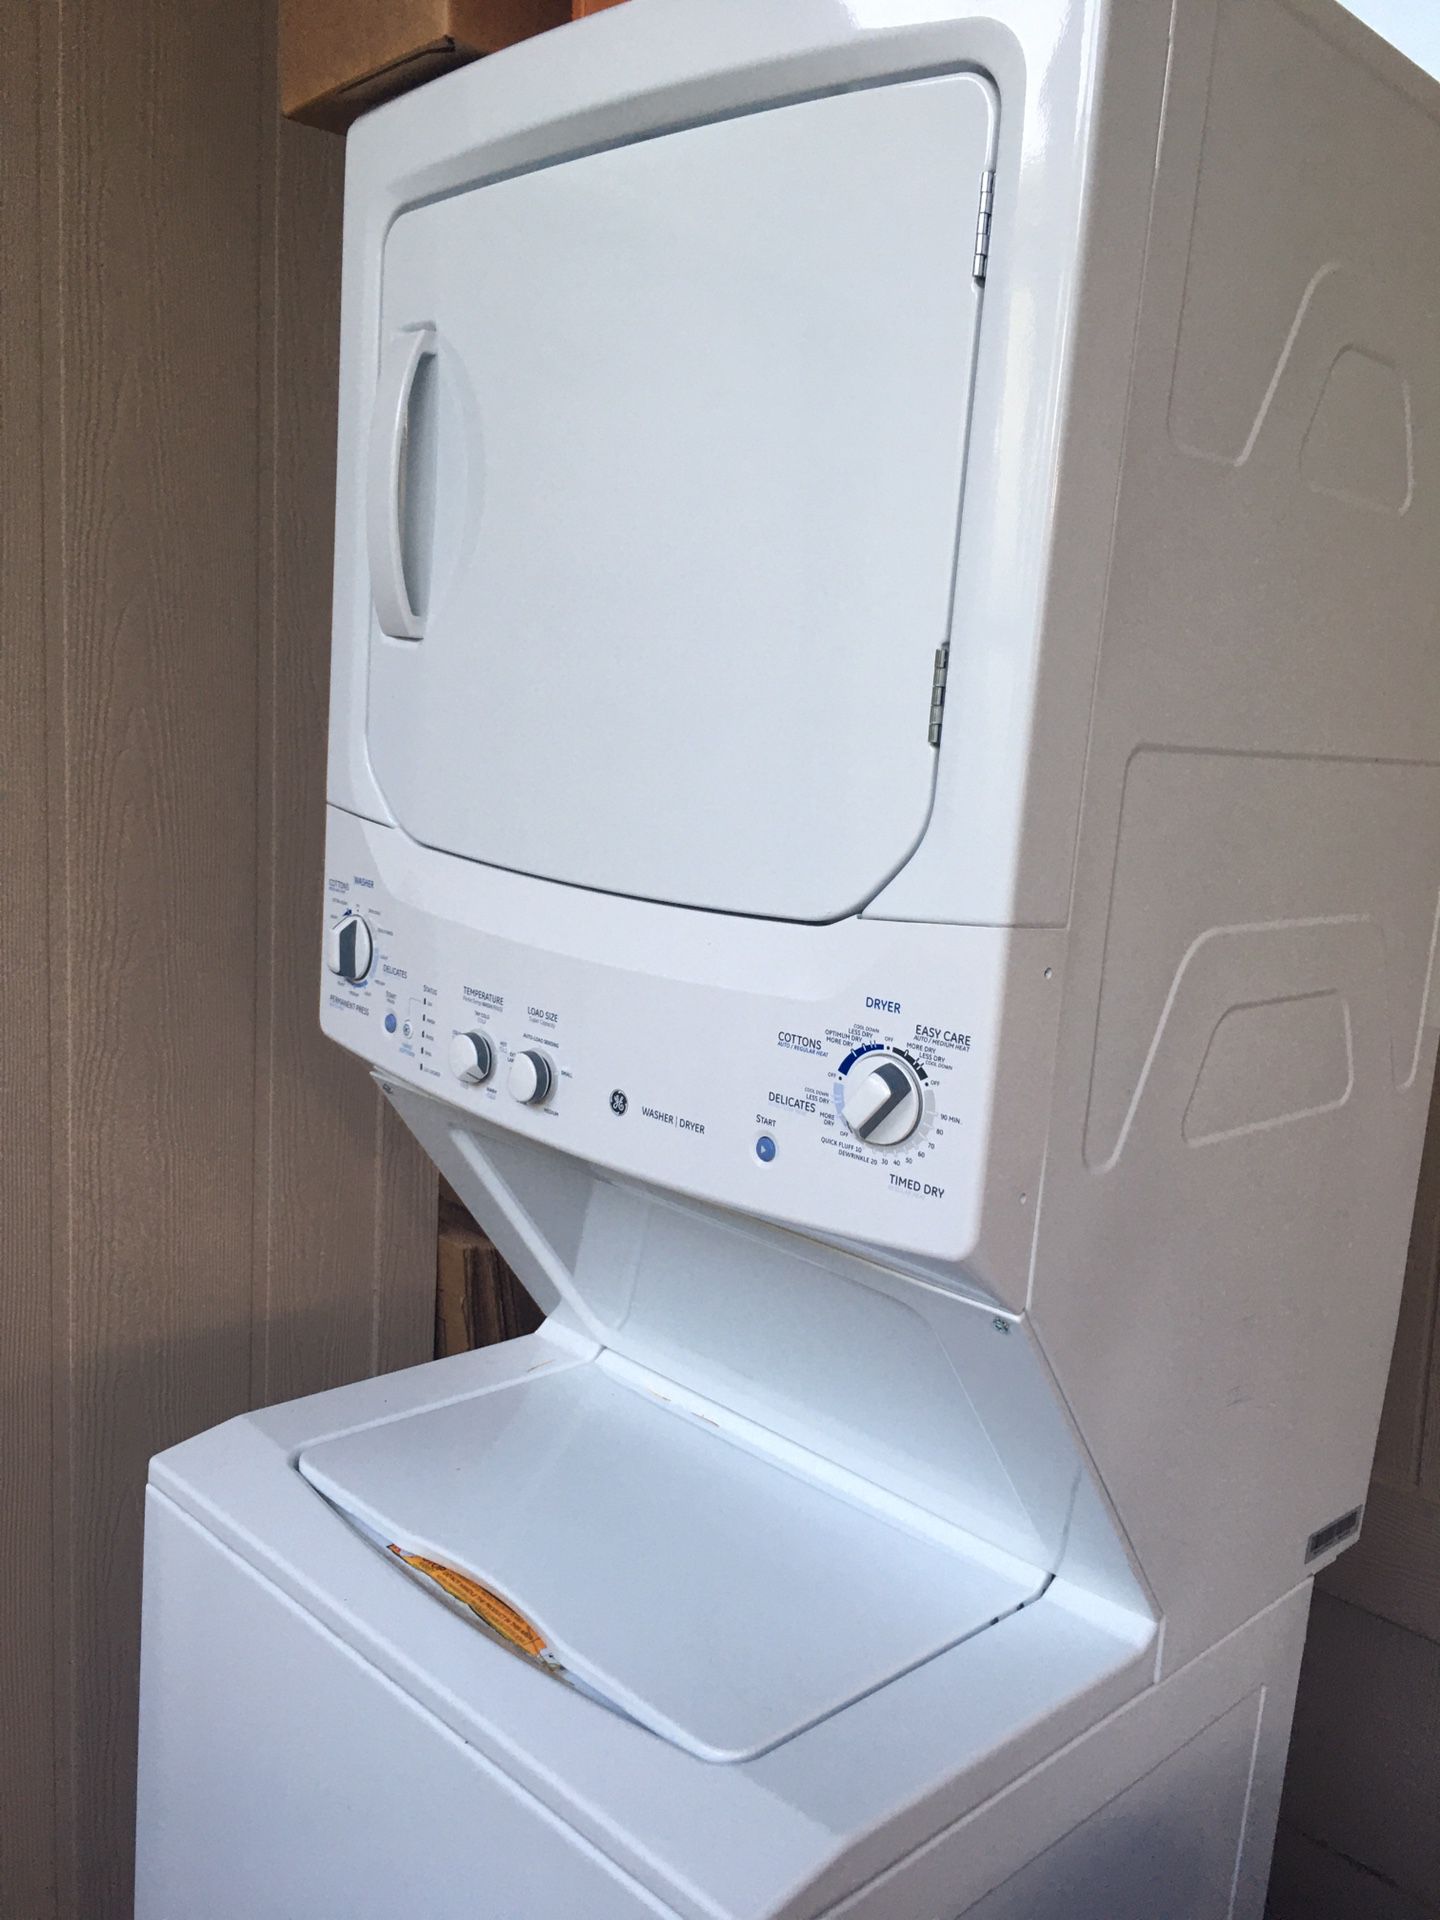 GE Washer/Dryer Combo